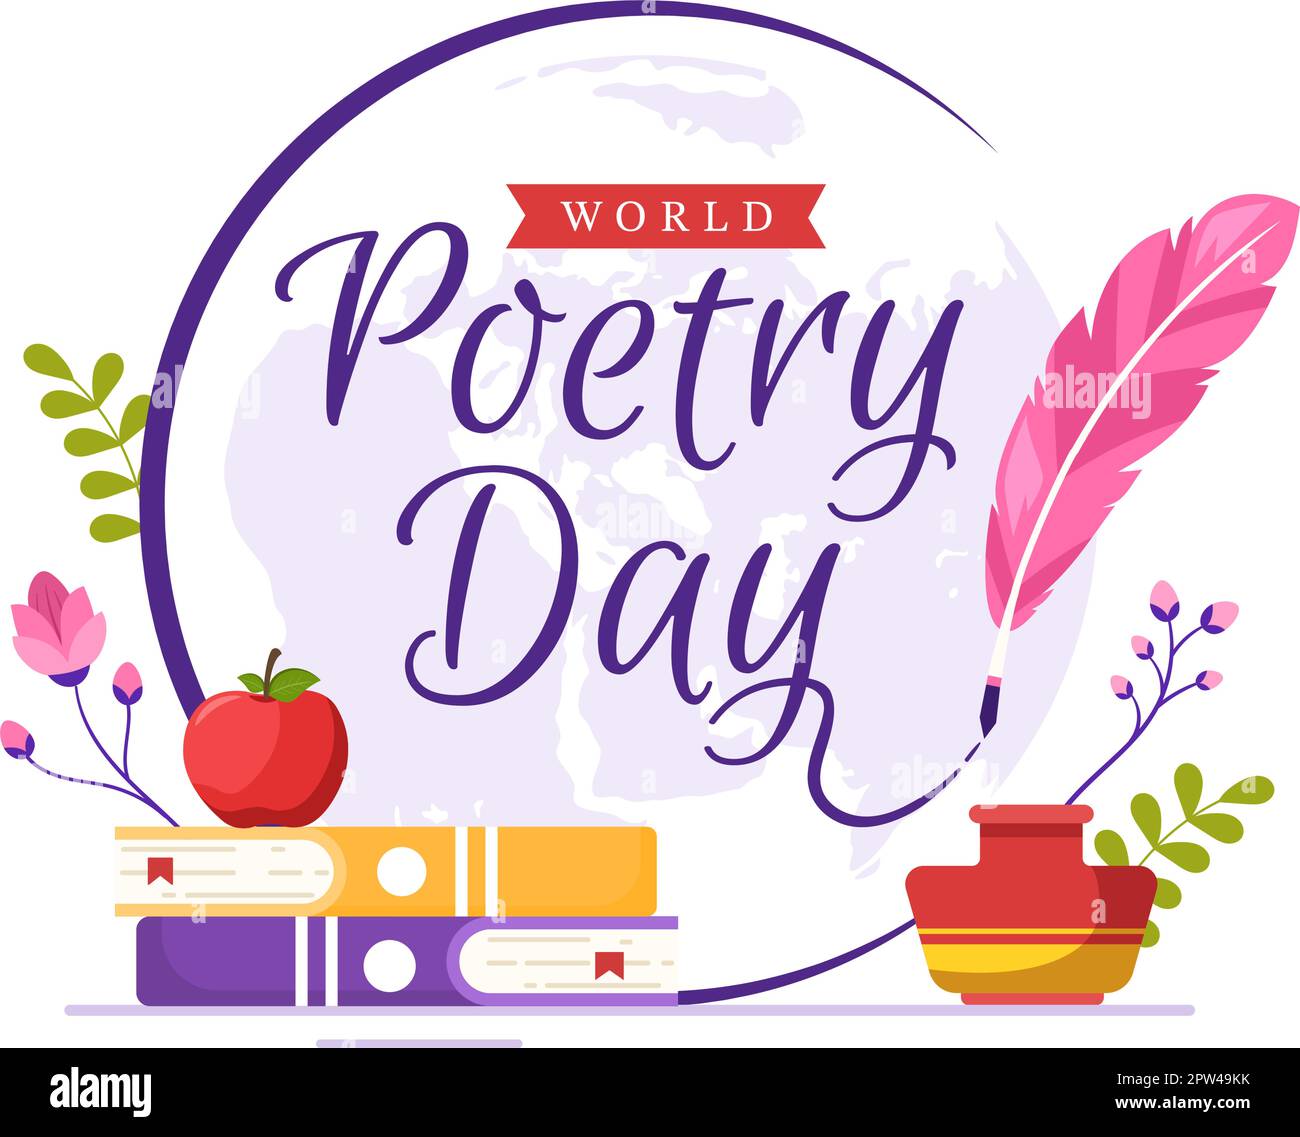 World Poetry Day on March 21 Illustration with a Quill, Paper or Typewriter for Web Banner or Landing Page in Flat Cartoon Hand Drawn Templates Stock Vector